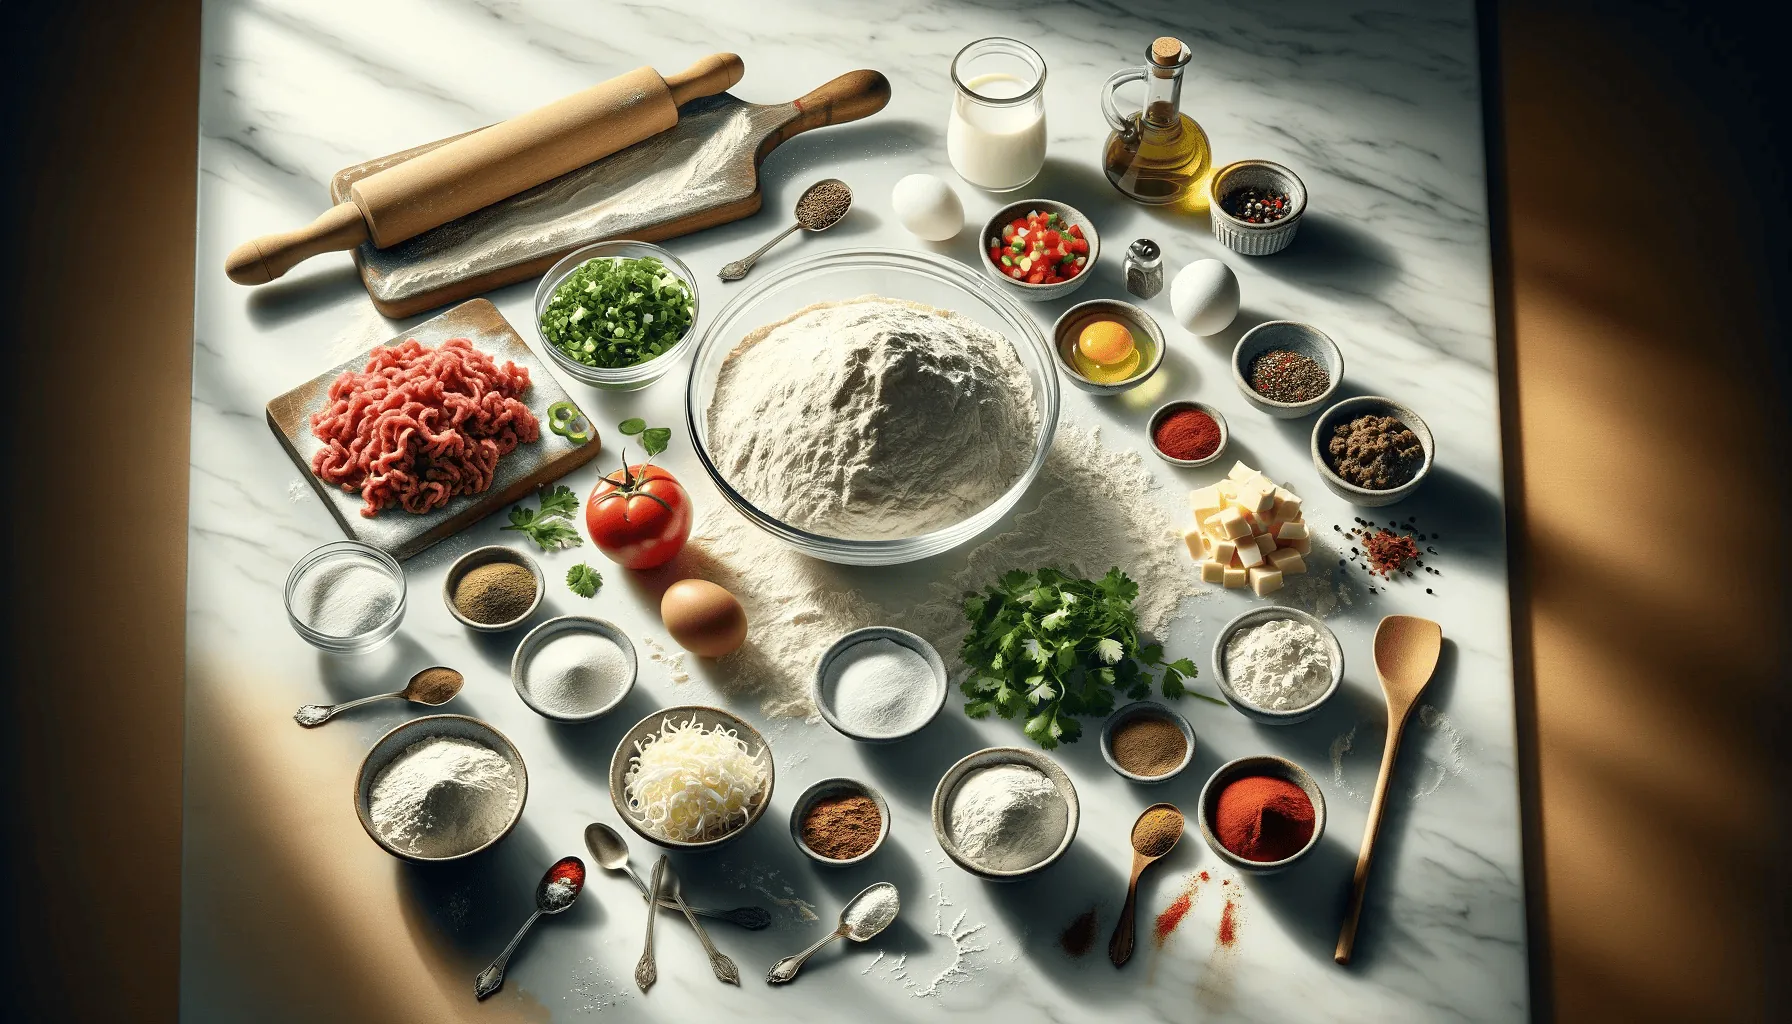 Flour, water, spices, and ground beef are arranged neatly